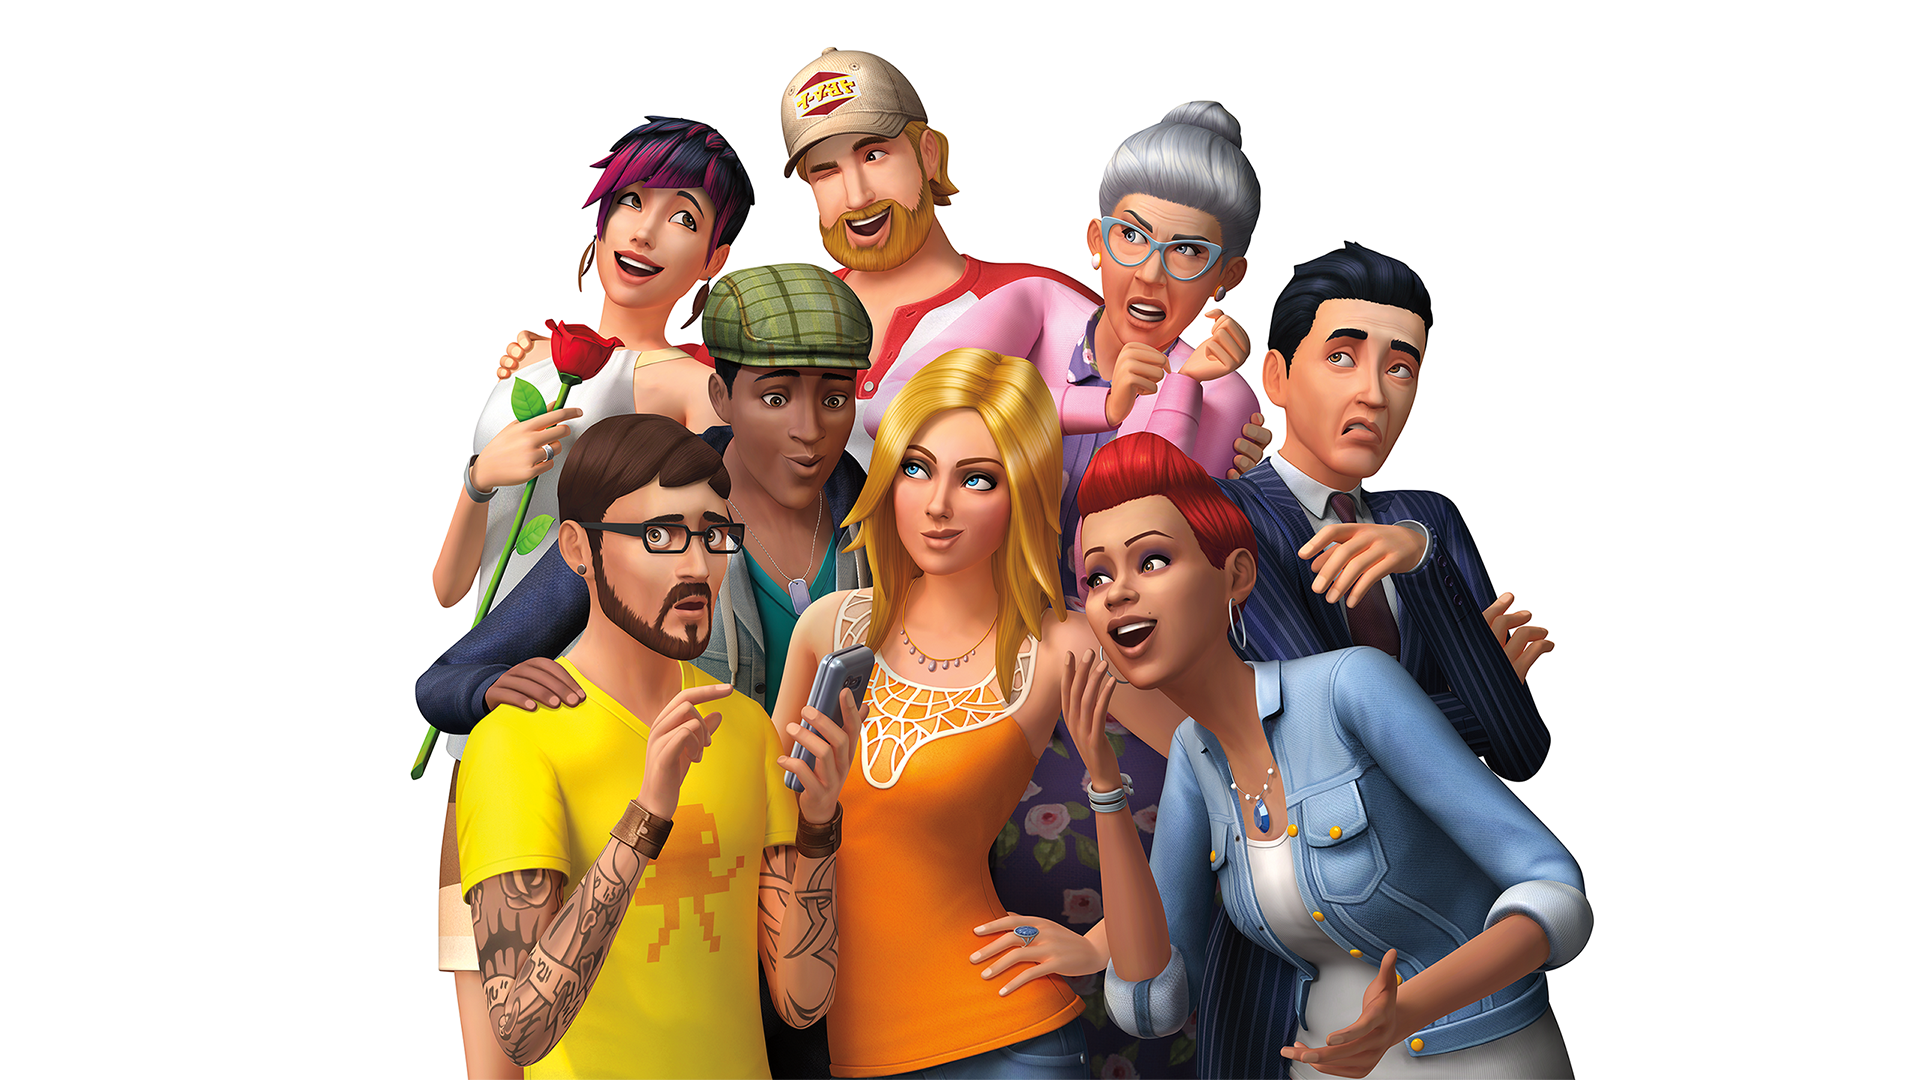 HD desktop wallpaper featuring a group of diverse animated characters from The Sims 4, displaying expressive poses and emotions.